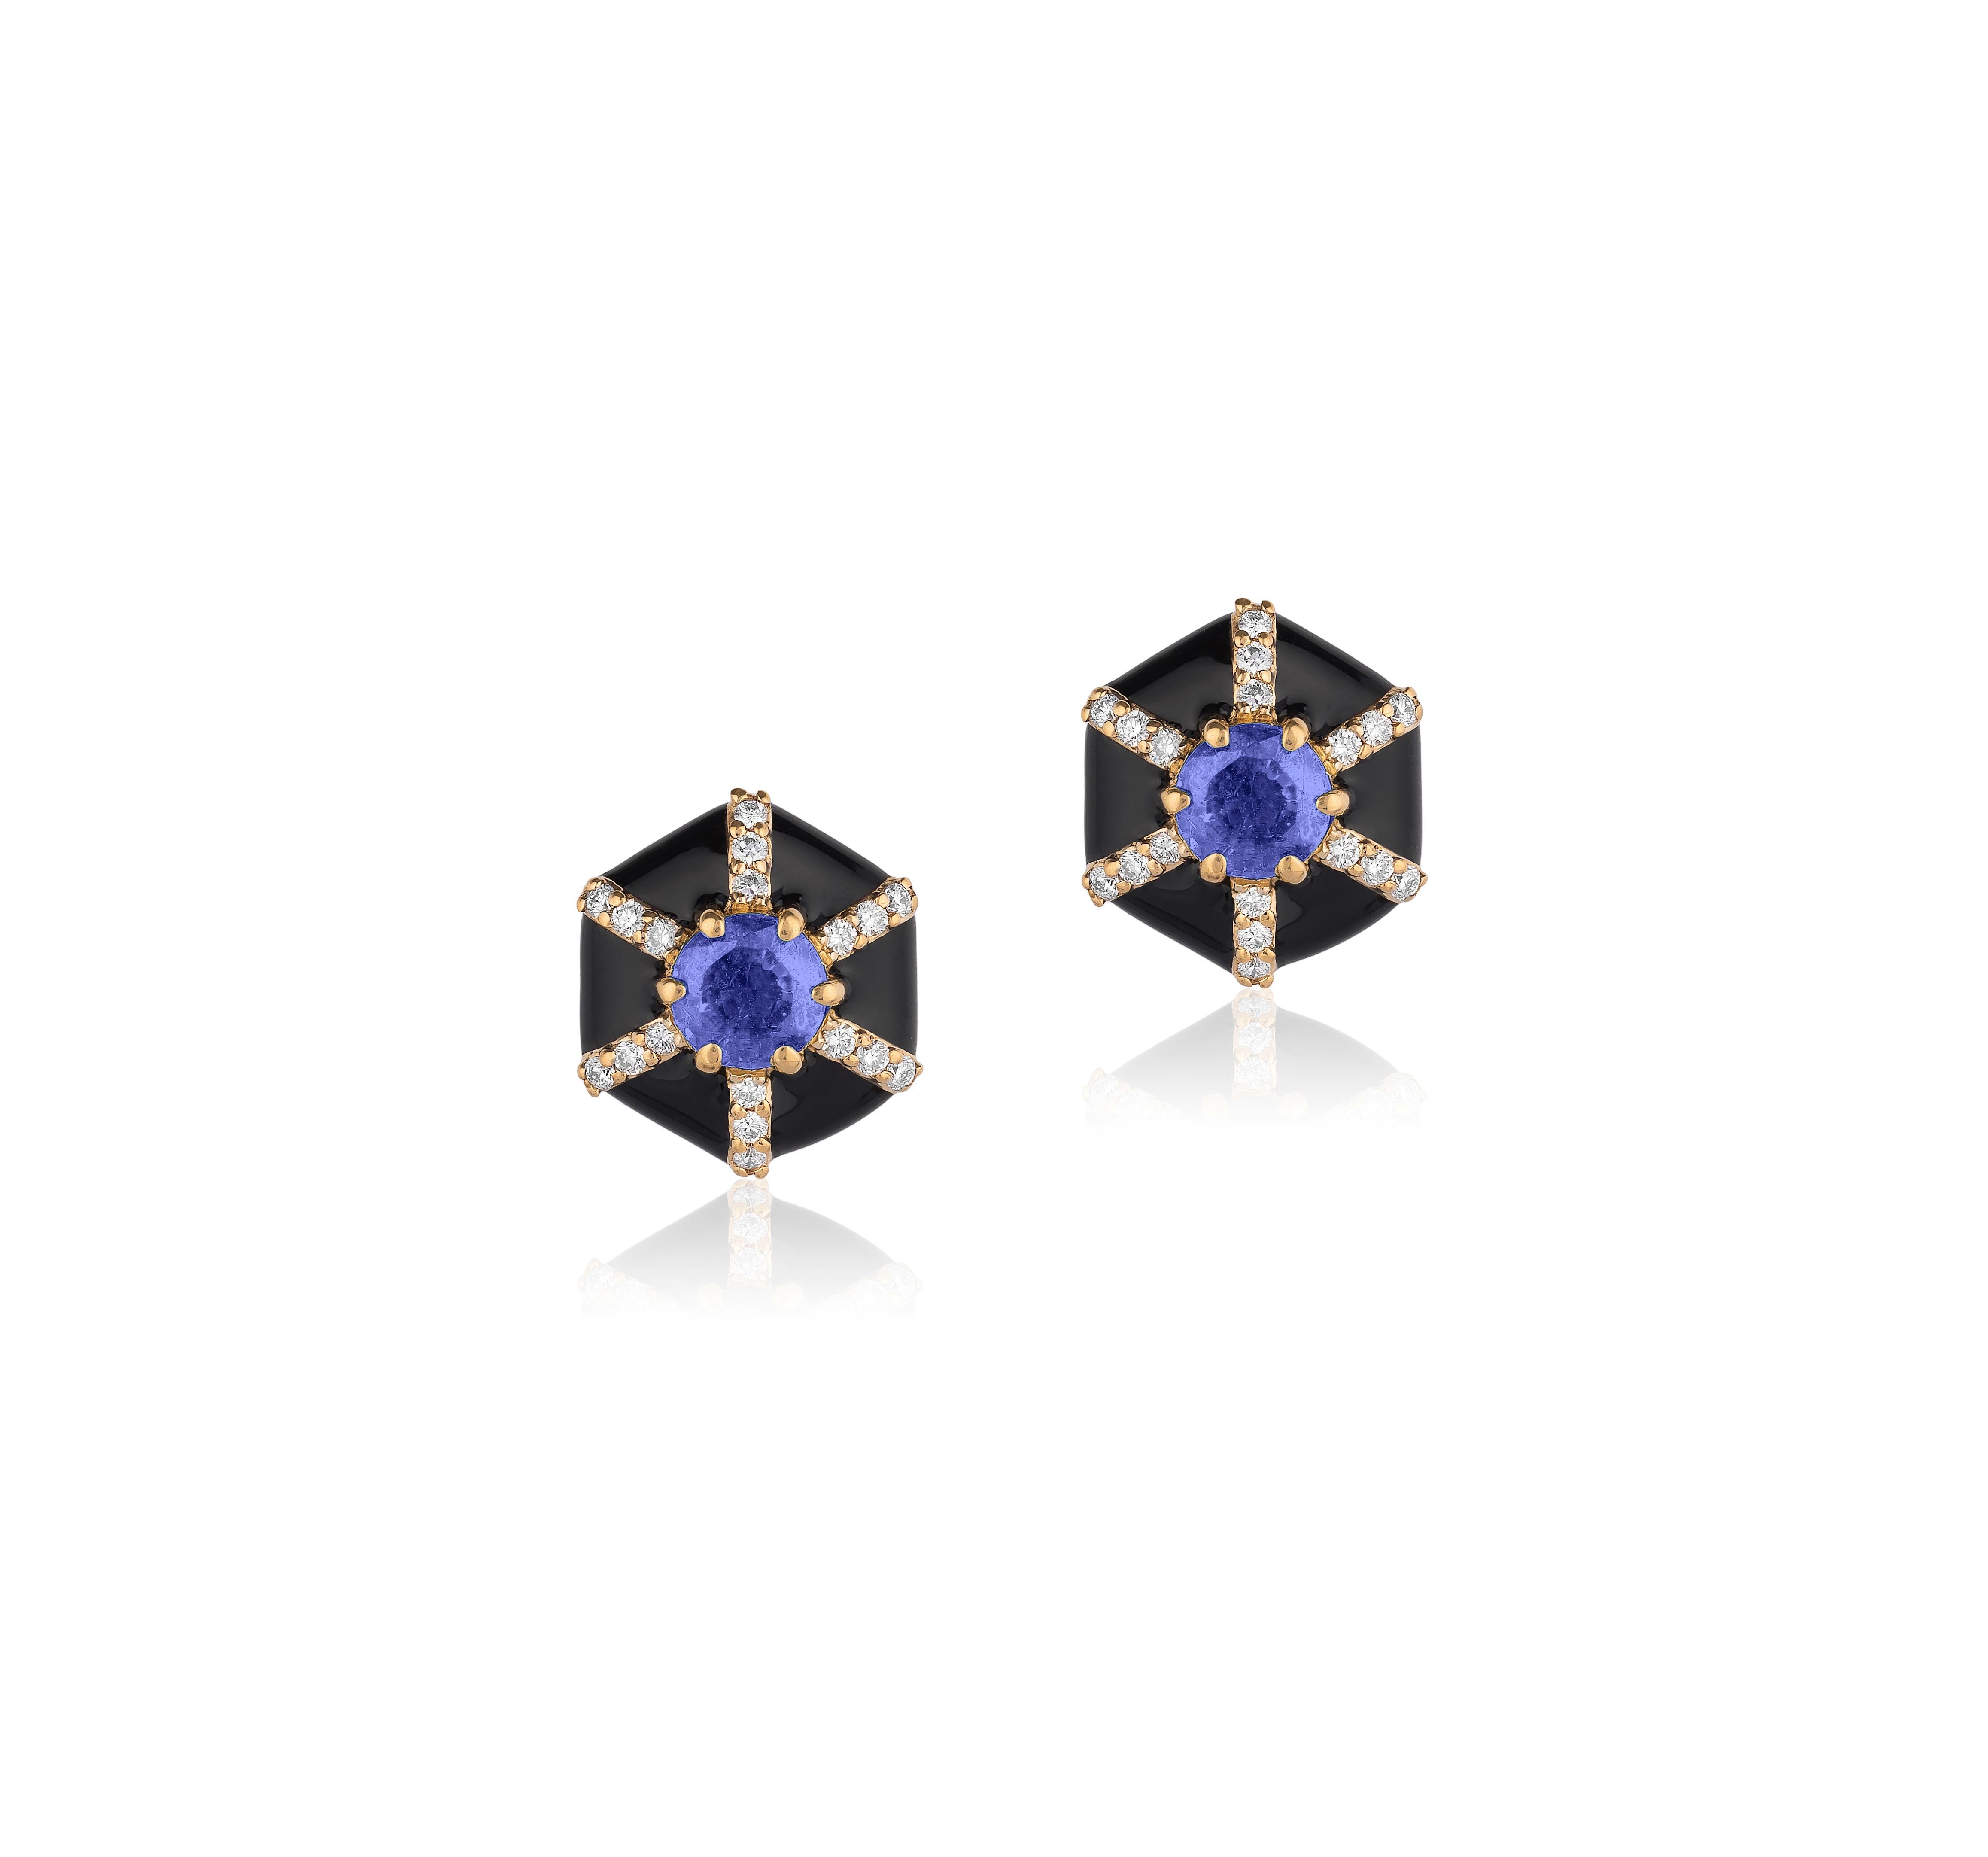 Black Enamel Stud Earrings with Sapphire and Diamonds in 18K Yellow Gold. from 'Queen' Collection

Stone Size: 4 mm
Approx. Stone Wt: Sapphire- 0.72 Carats 
Diamonds: G-H / VS, Approx. Wt: 0.13 Carats   